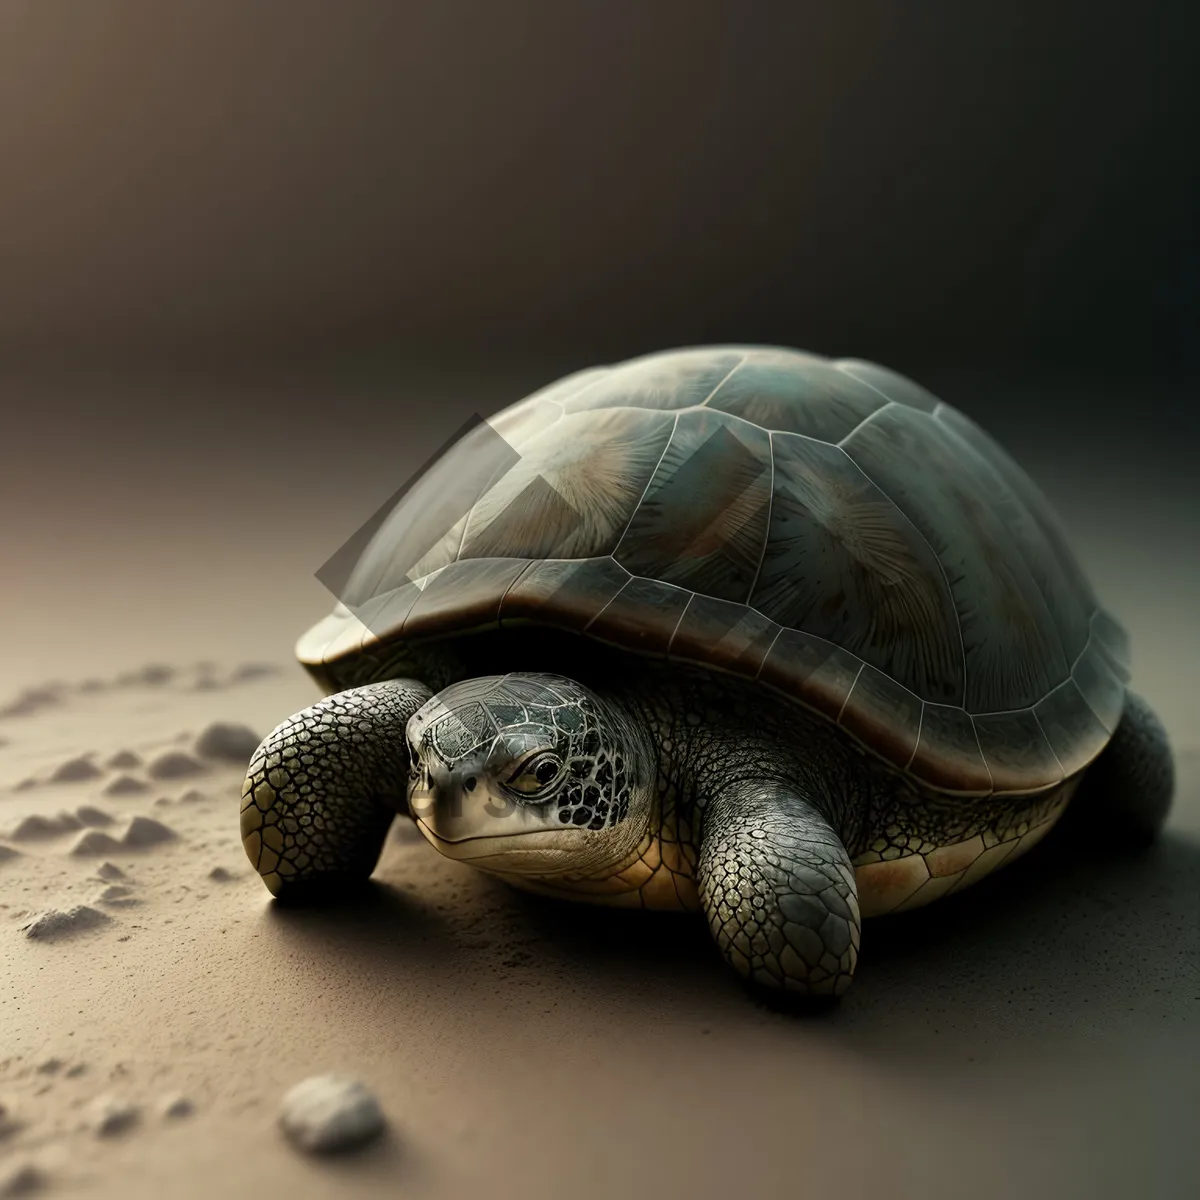 Picture of Cute Terrapin Turtle Slowing Through Mud